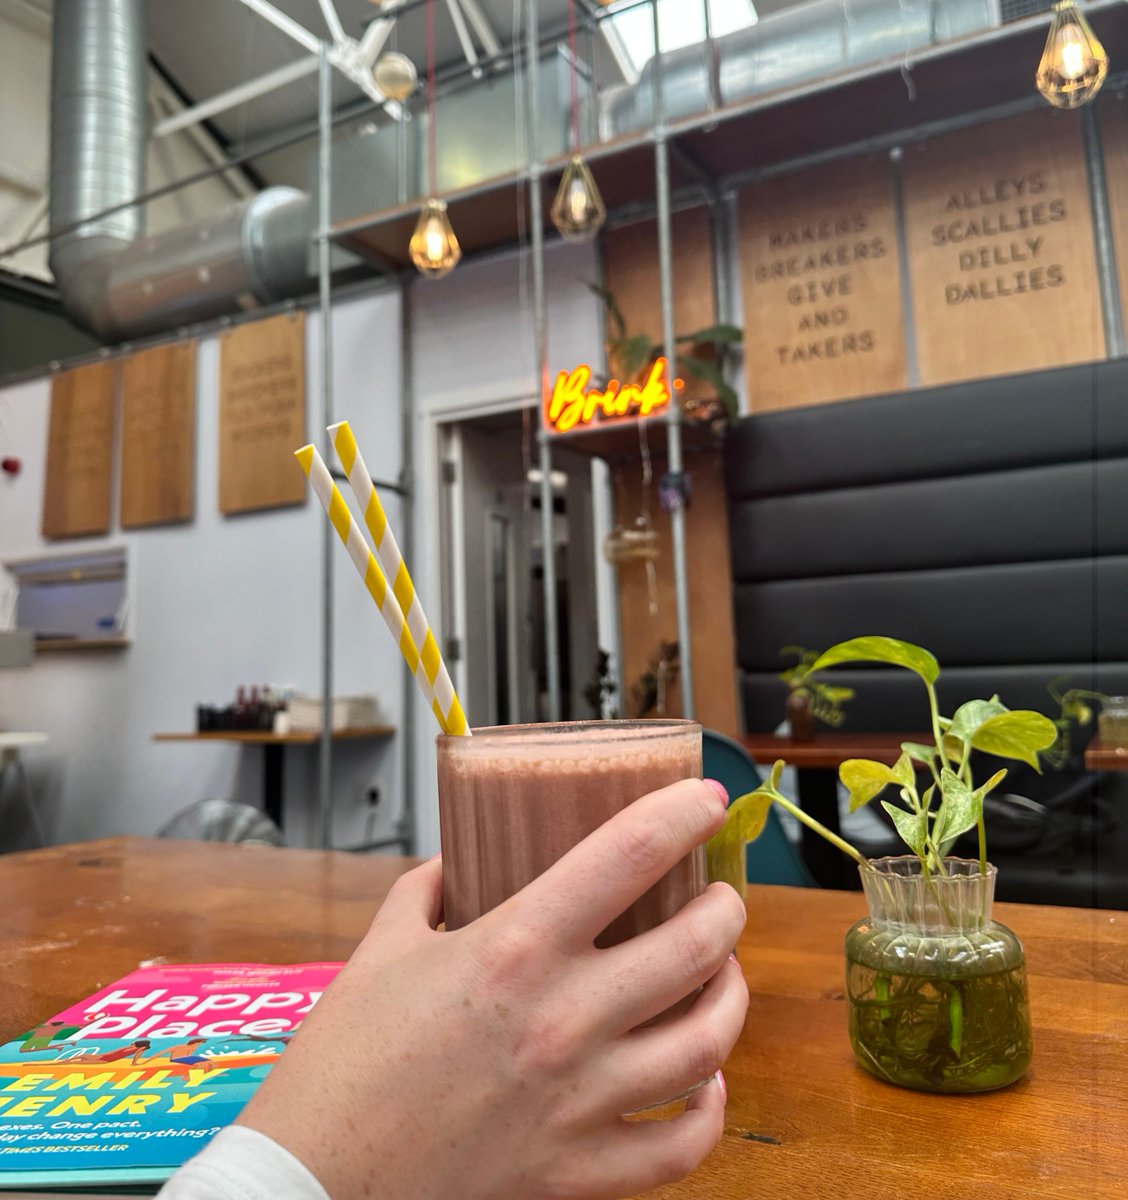 Looking for a place that serves a delicious range of drinks but without the alcohol? Come and see us 😃

📍 15-21 Parr St, Liverpool, L1 4JN

#TheBrink #Liverpool #LiverpoolDryBar #DryBar #ThingsToDoLiverpool #LiverpoolCafe